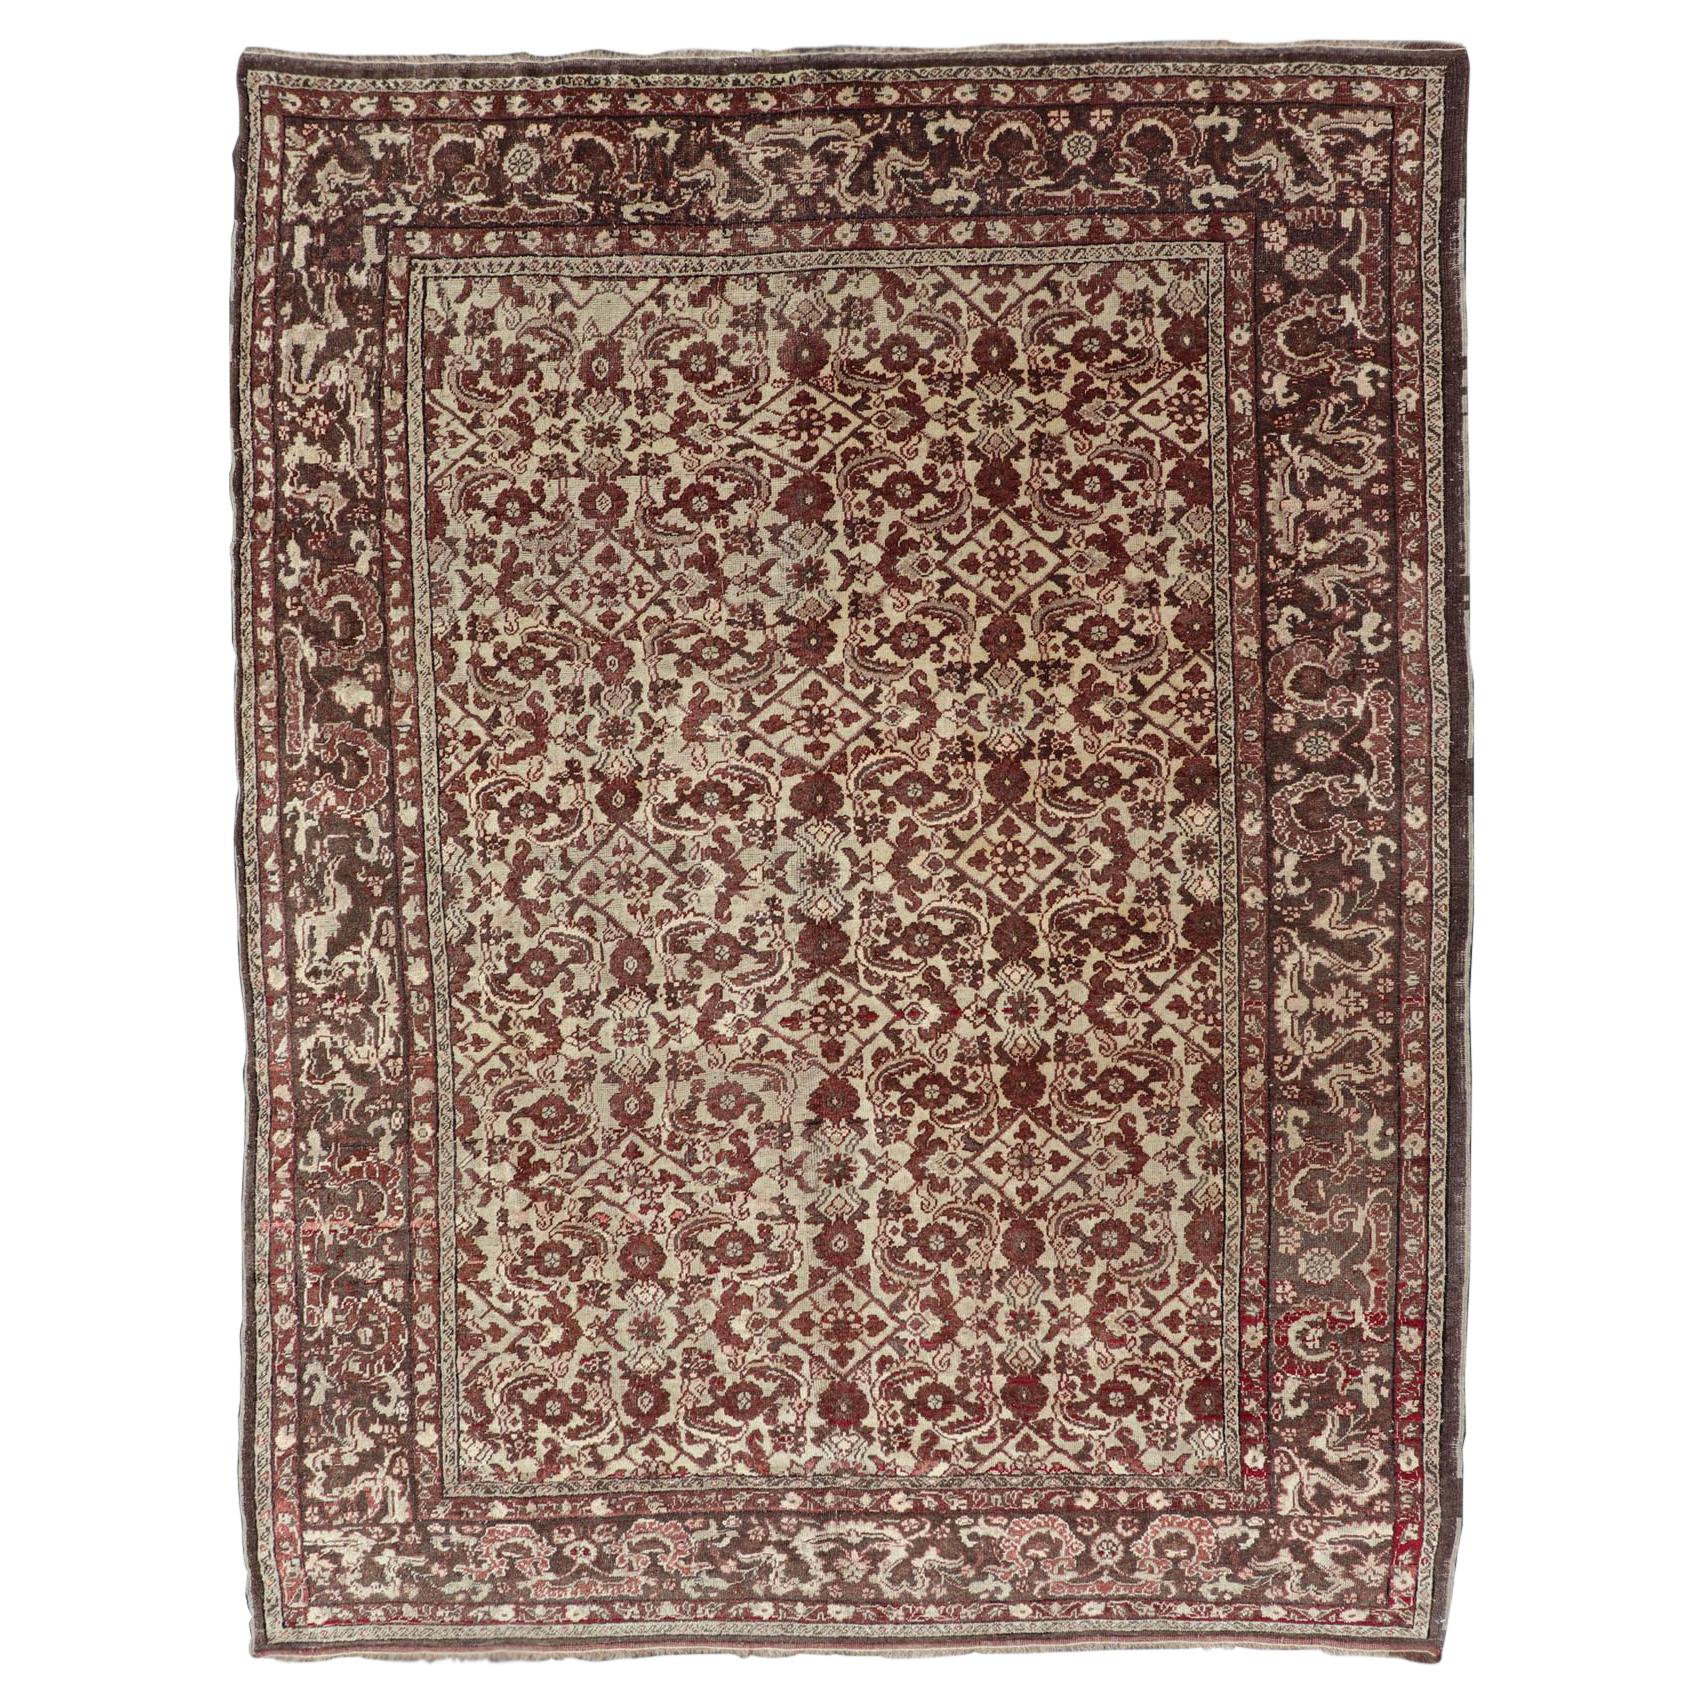 Antique Turkish Sivas Rug with Tan Background and Maroon, Eggplant, Brown Color 